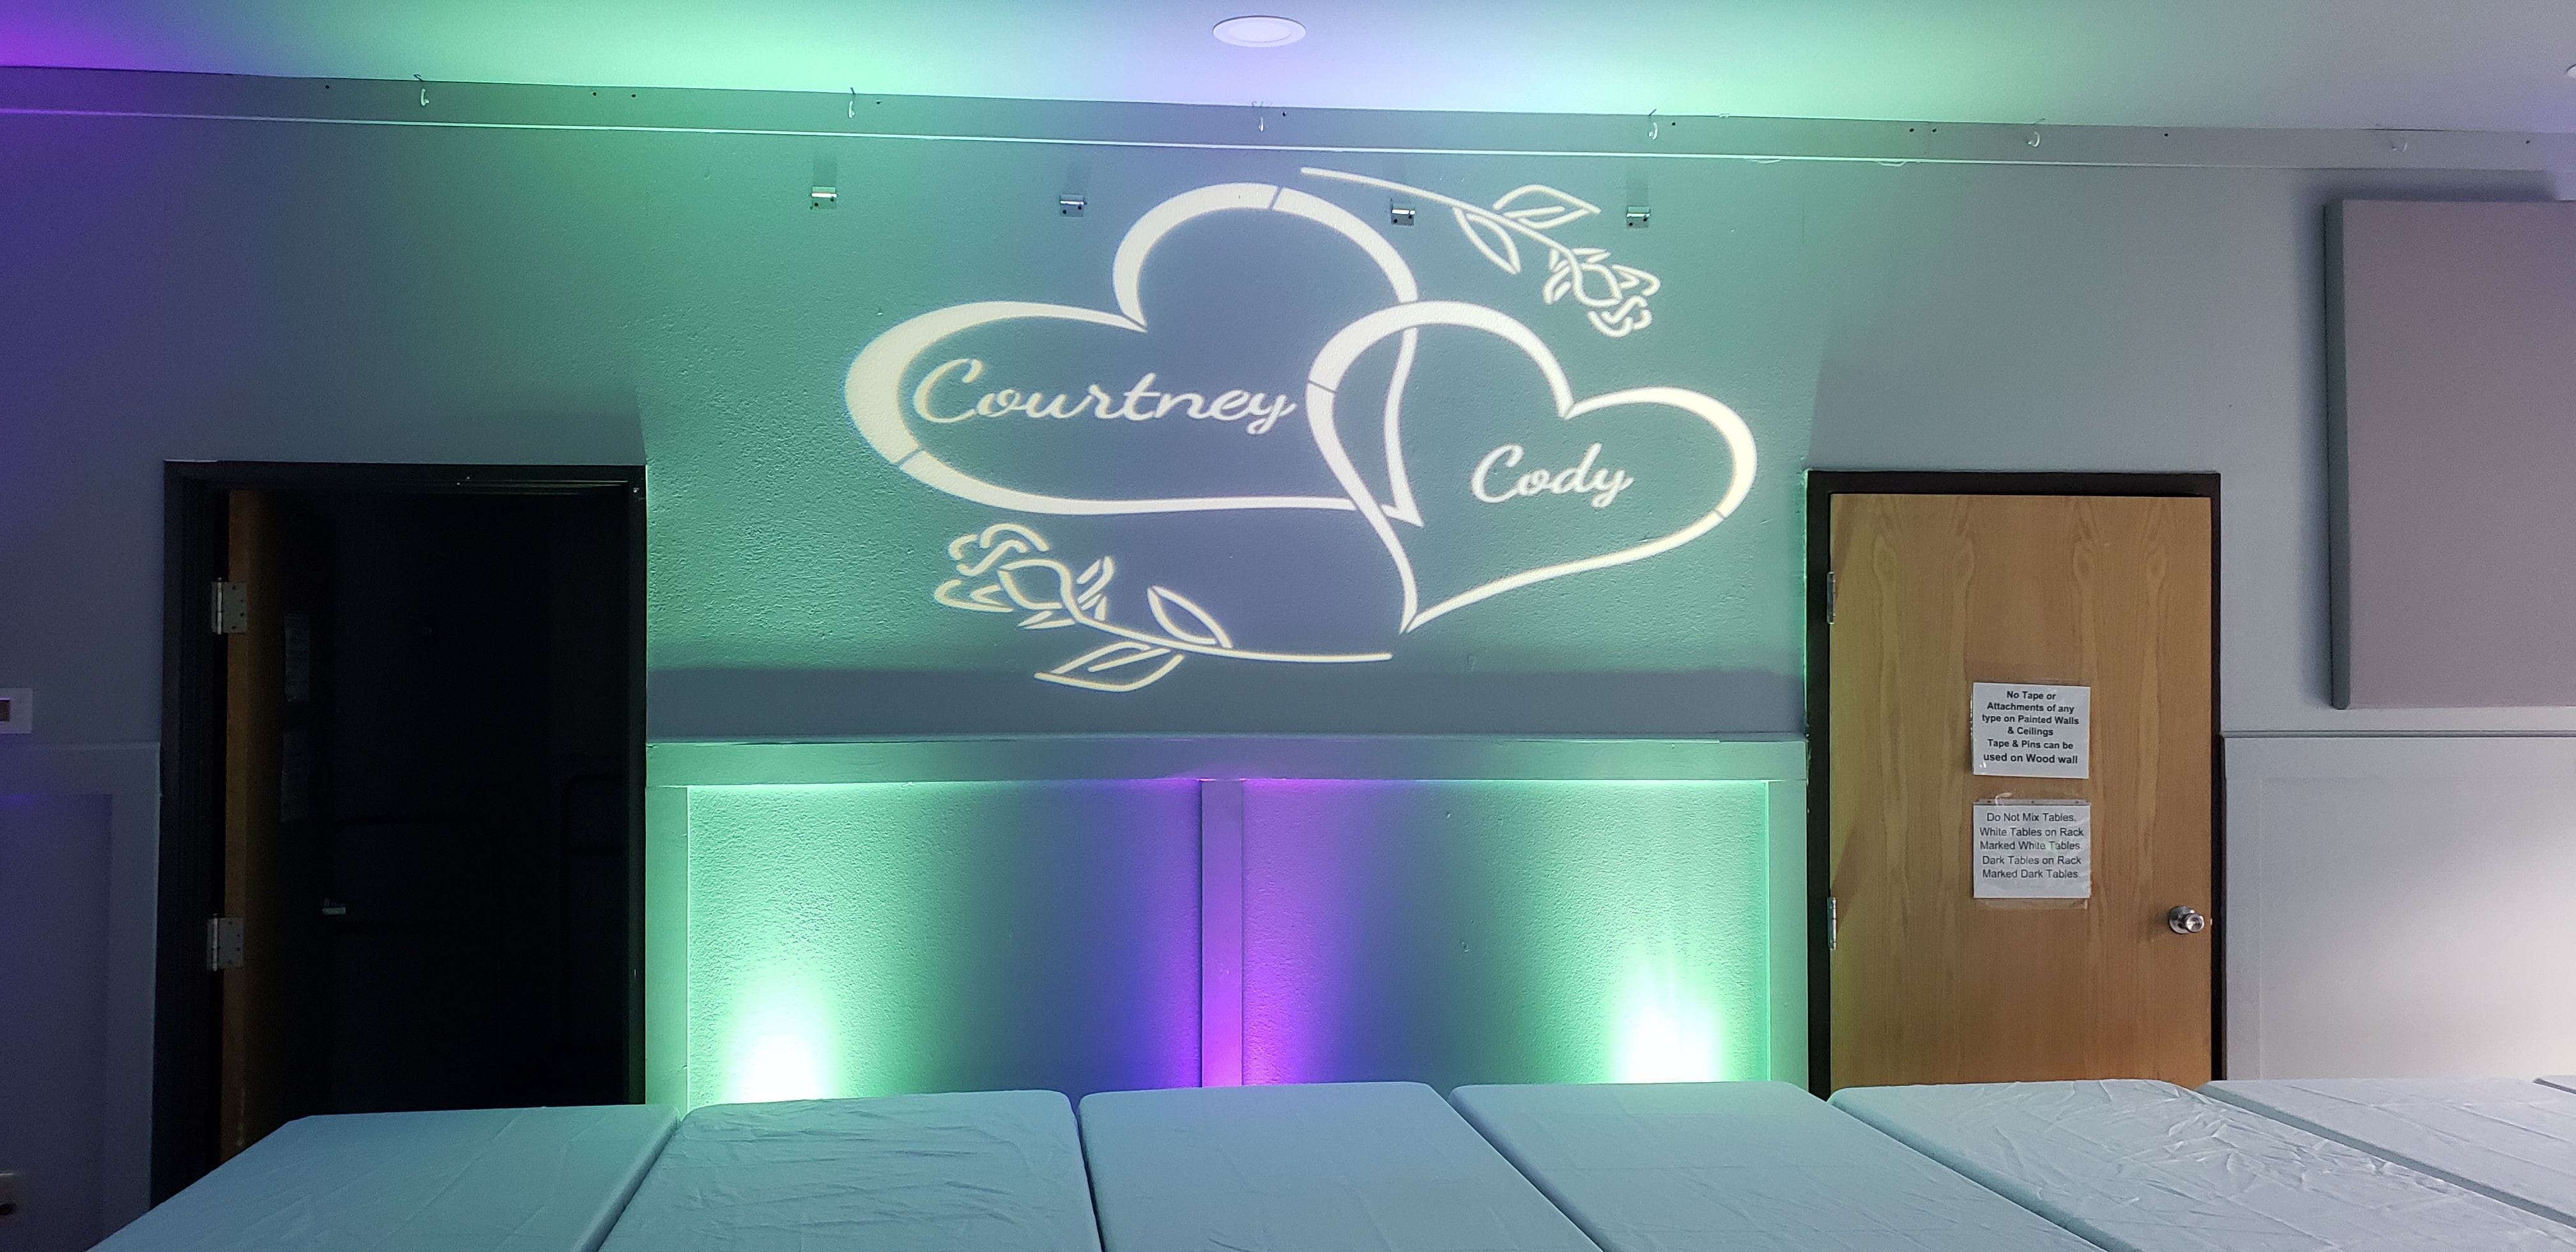 A wedding monogram projected on the wall with purple andmint green up lighting below it.